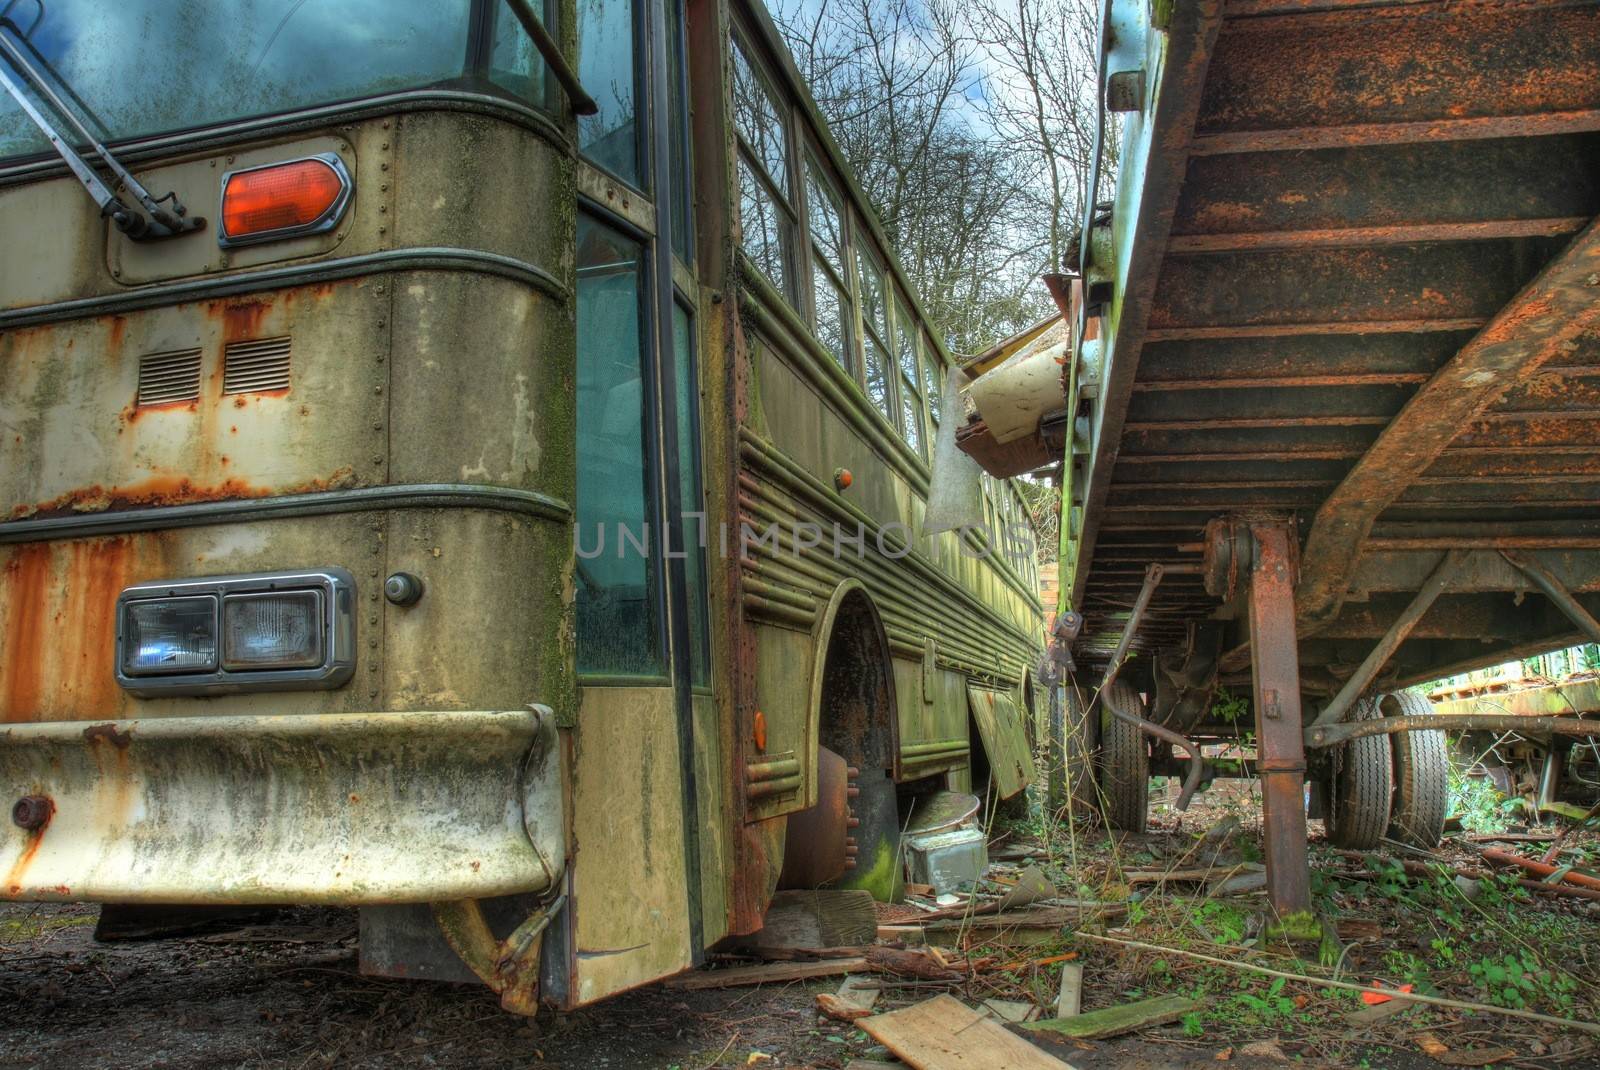 Old coach and trailer at scrapyard, Worcestershire, England.